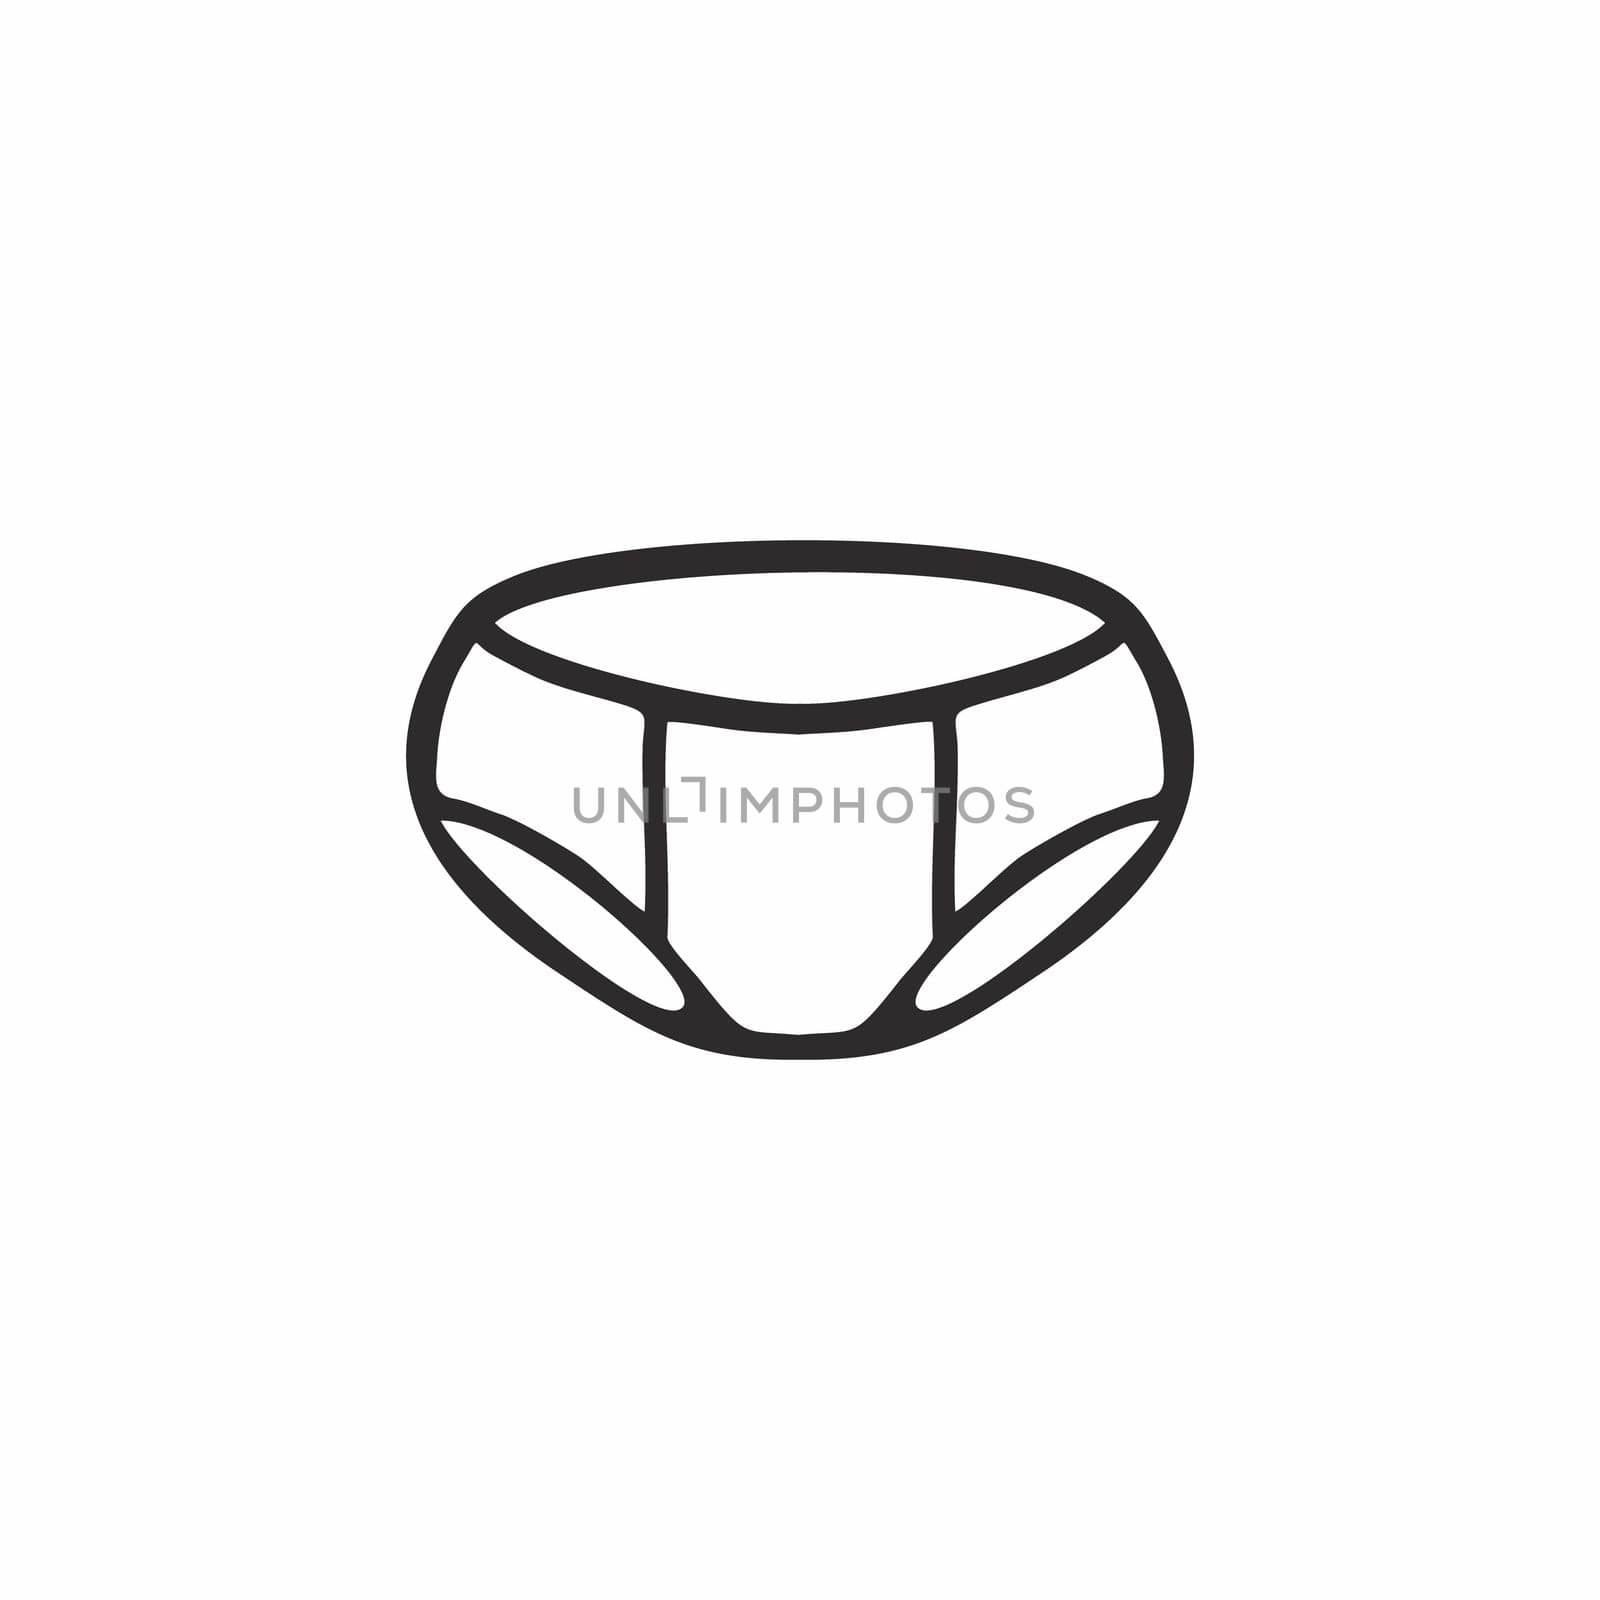 Children's underwear for boys and girls. Contour illustration on intimate hygiene, body care, and children's clothing. Diapers for newborns. Doodle icon for a website with children's products. by polinka_art